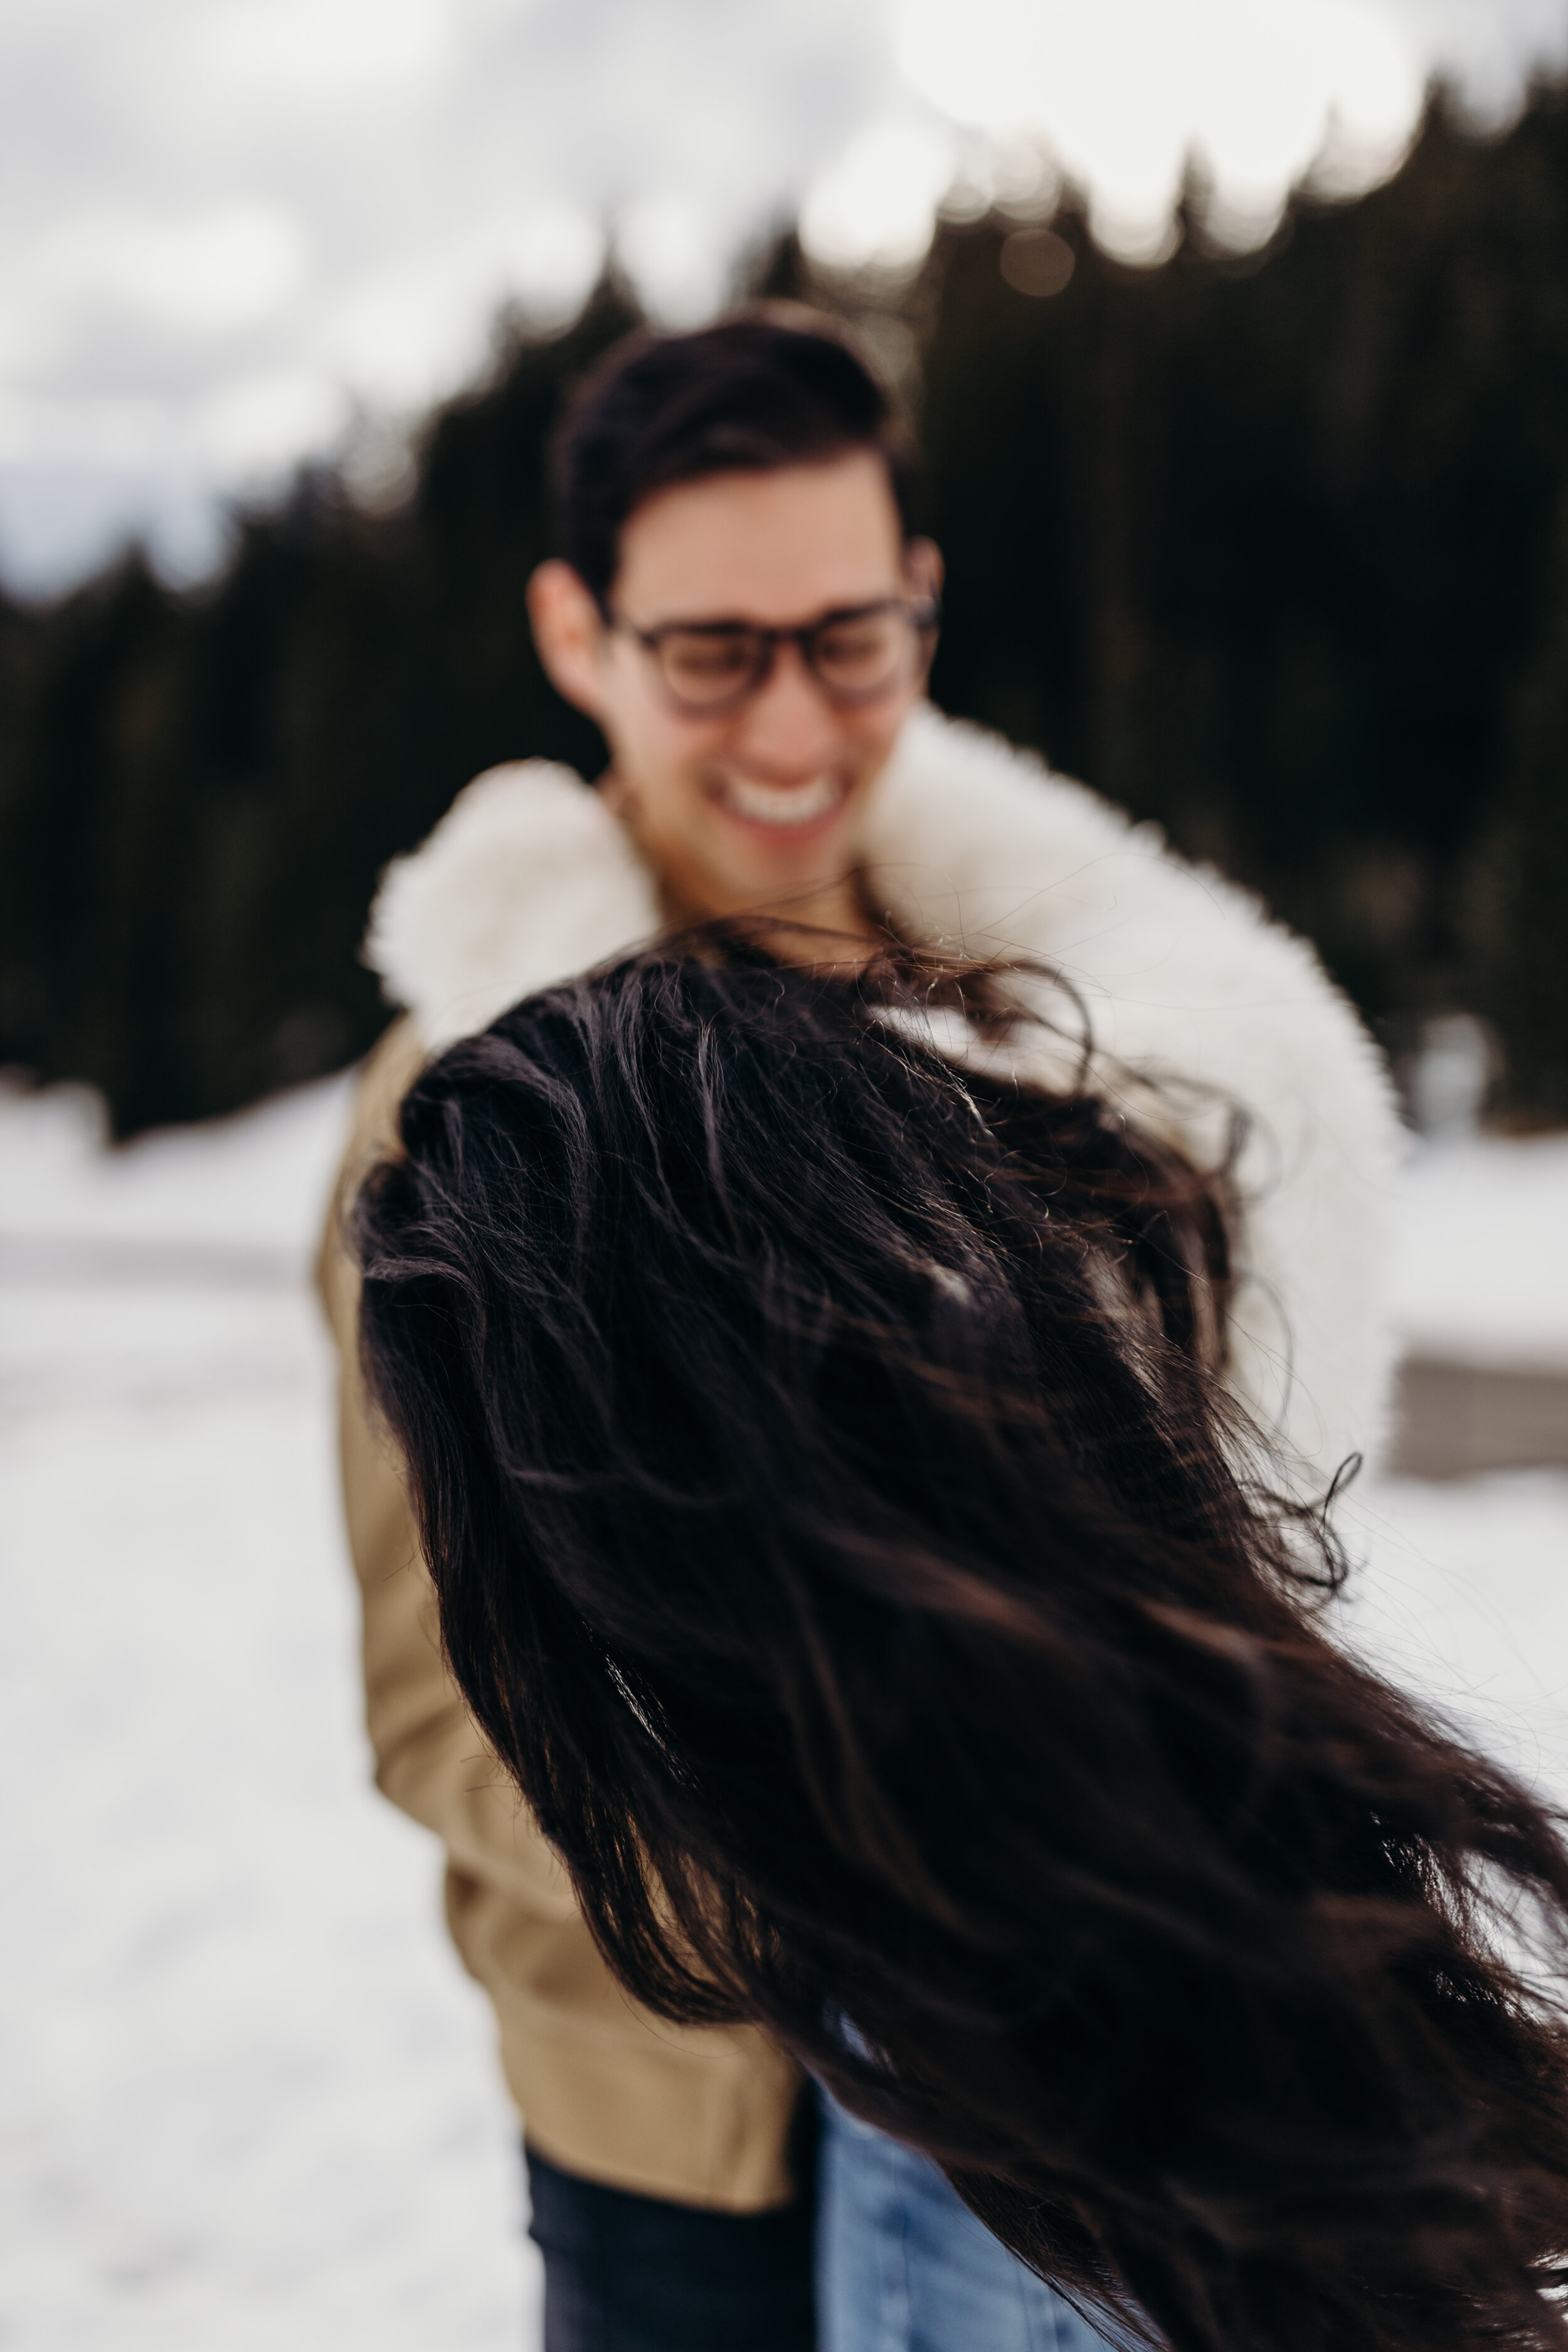 Cozy winter couple shoot snowy mountains engagement session photoshoot #coupleshoot #engagements #engagementshoot #weddingphotographer #utahphotographer